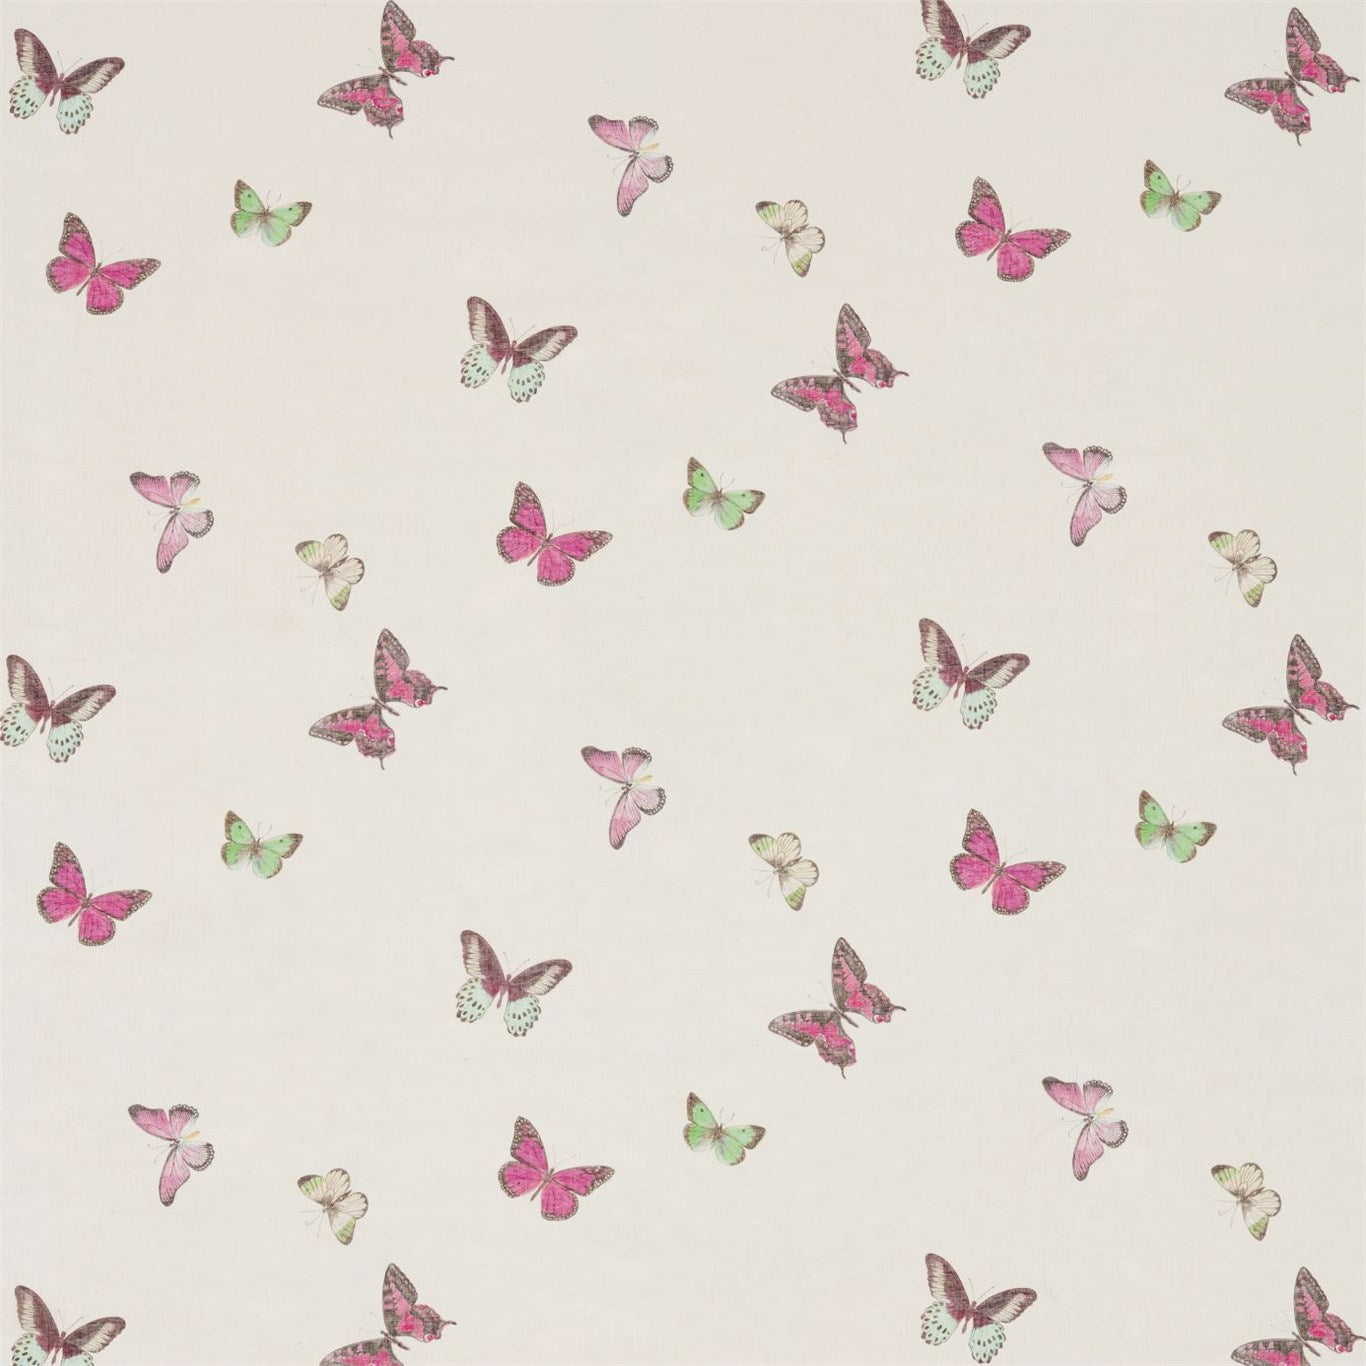 Butterfly Voile Fuchsia/Cream Fabric By Sanderson